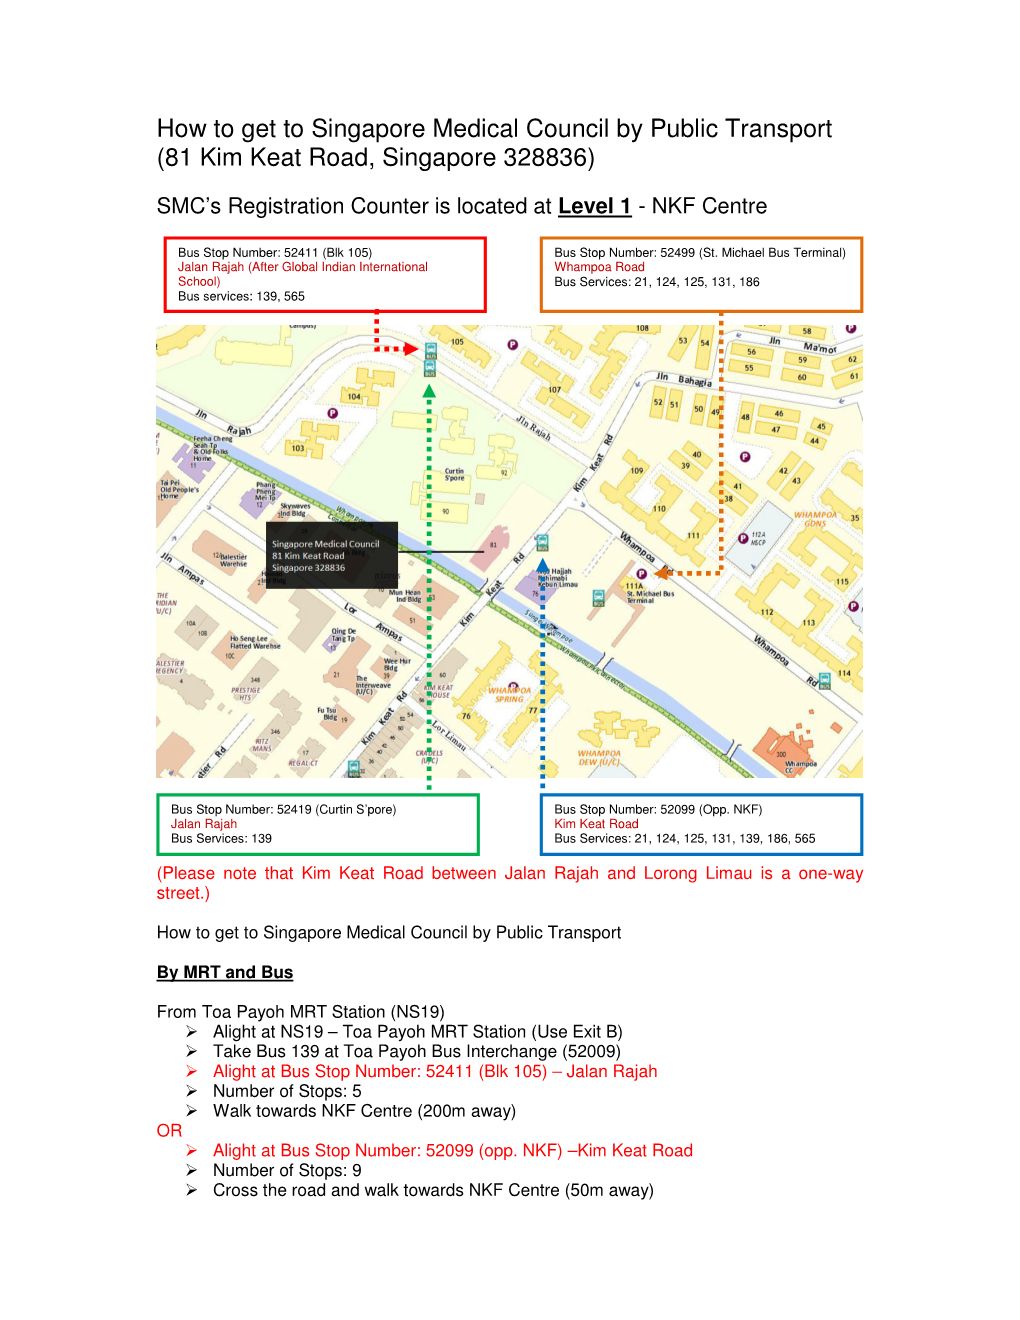 How to Get to Singapore Medical Council by Public Transport (81 Kim Keat Road, Singapore 328836)